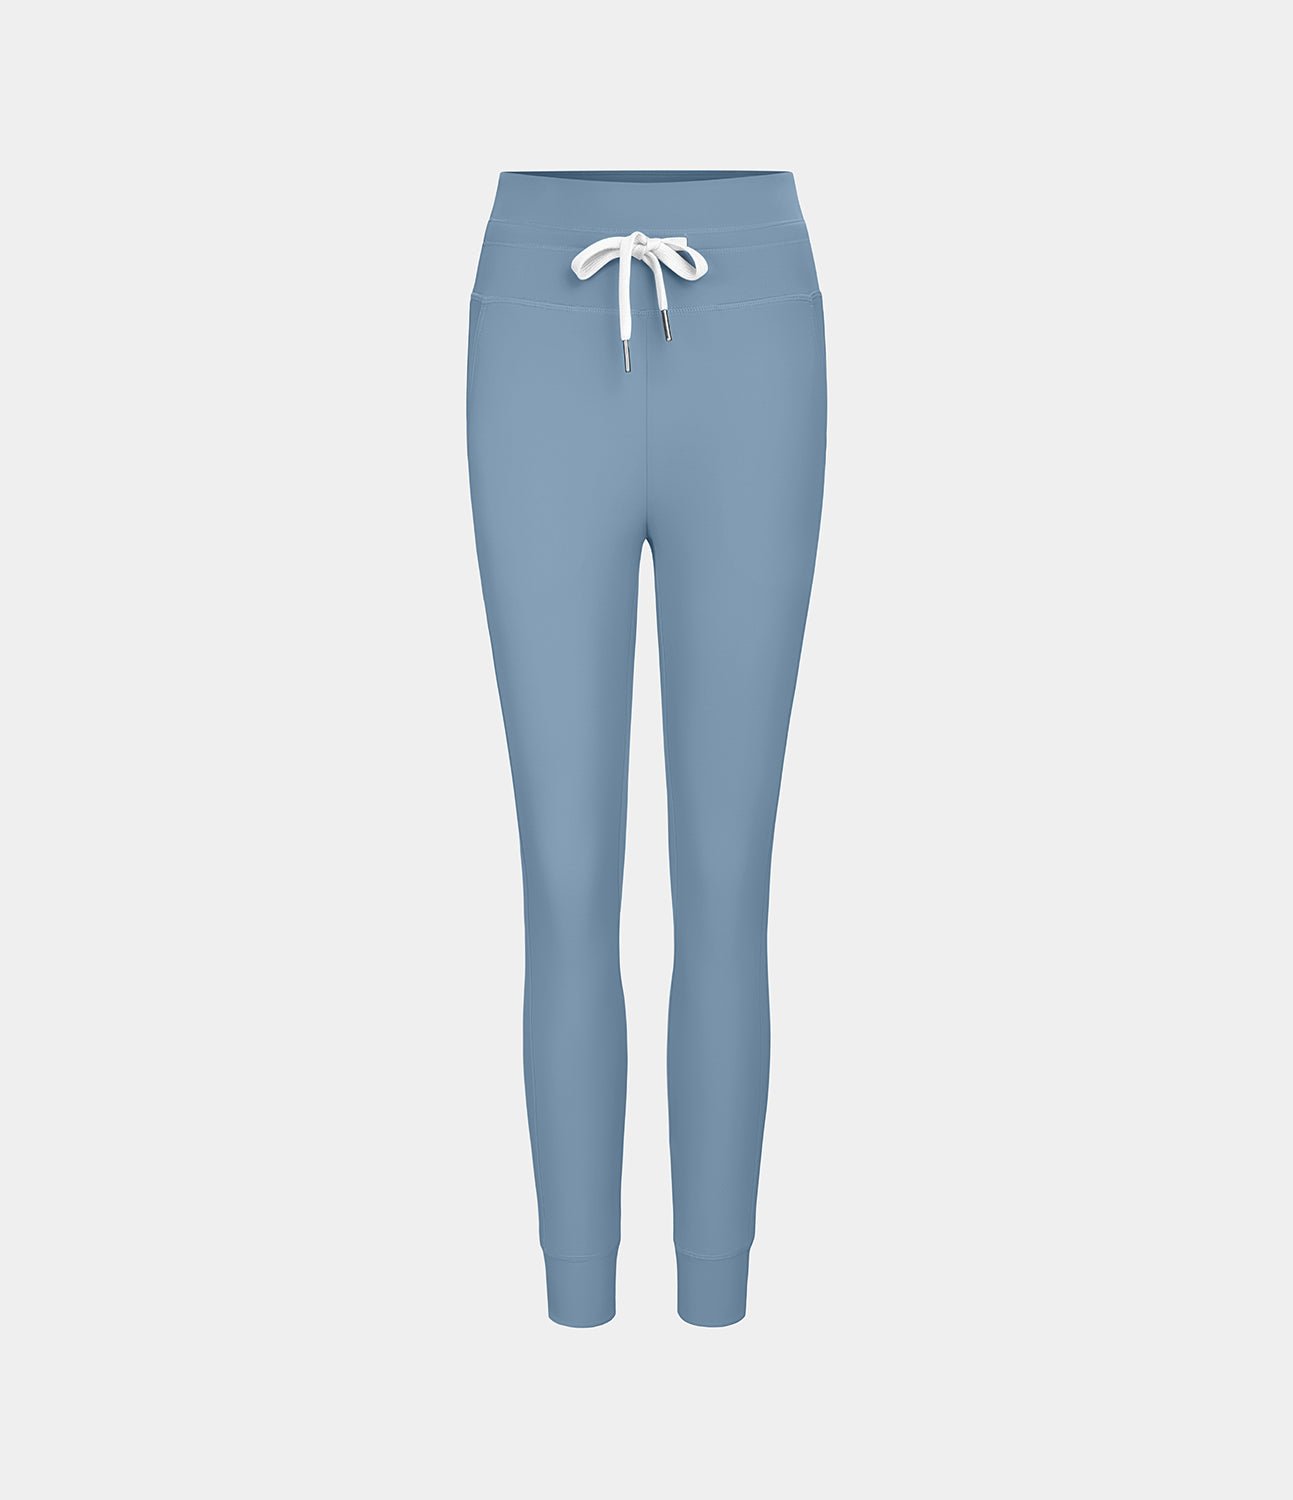 Sophie™ | sweatpants with high waistband, drawstring and side pockets